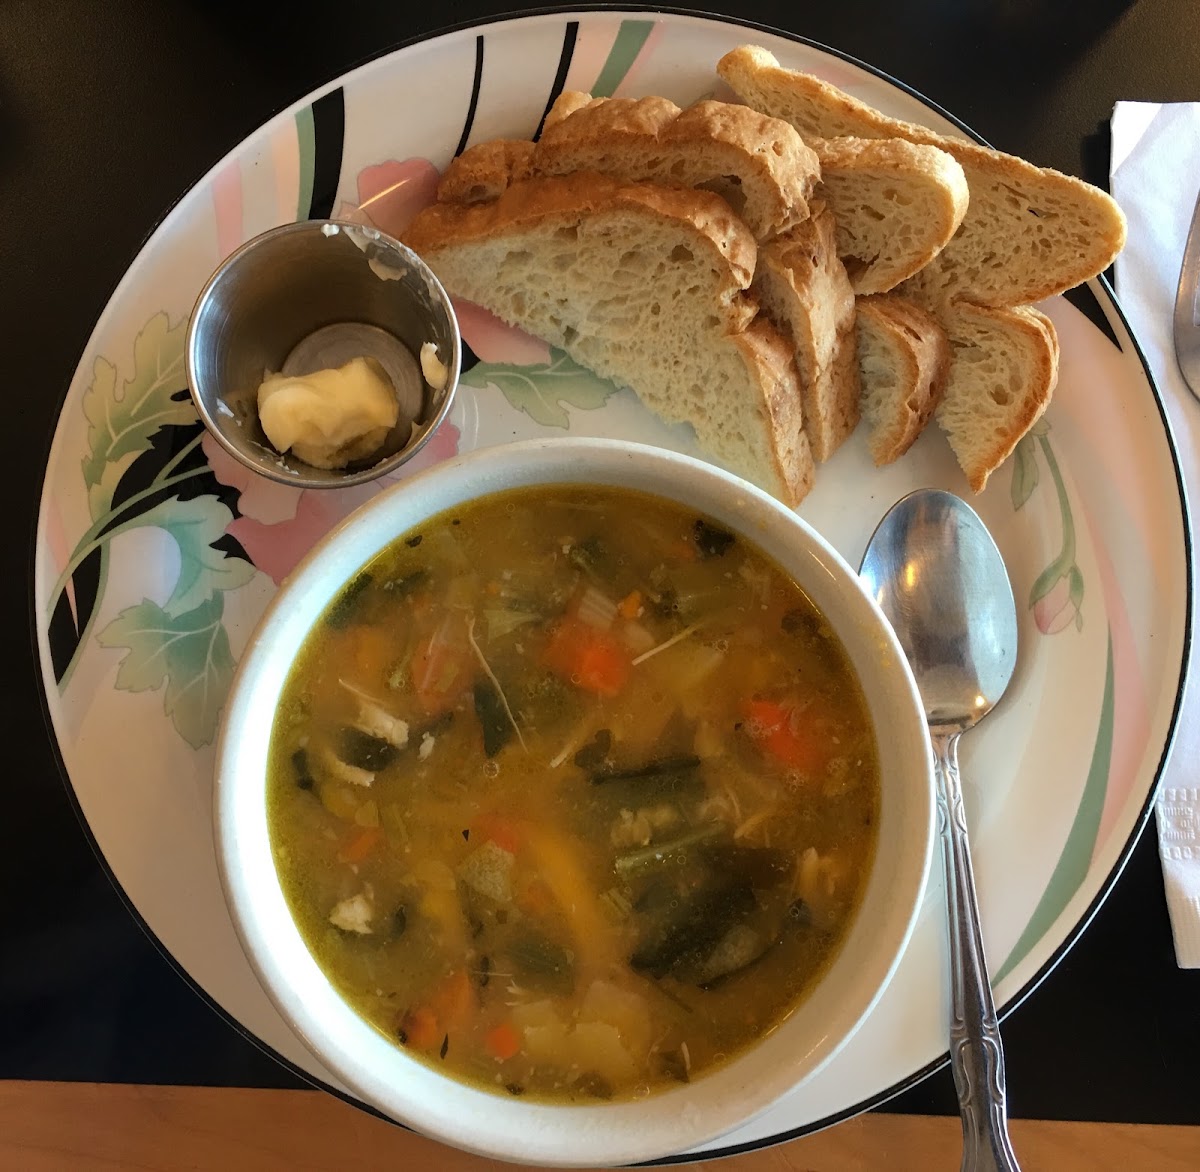 Bowl of Chicken and Rice Soup with gluten free sourdough bread. No longer serving sourdough.